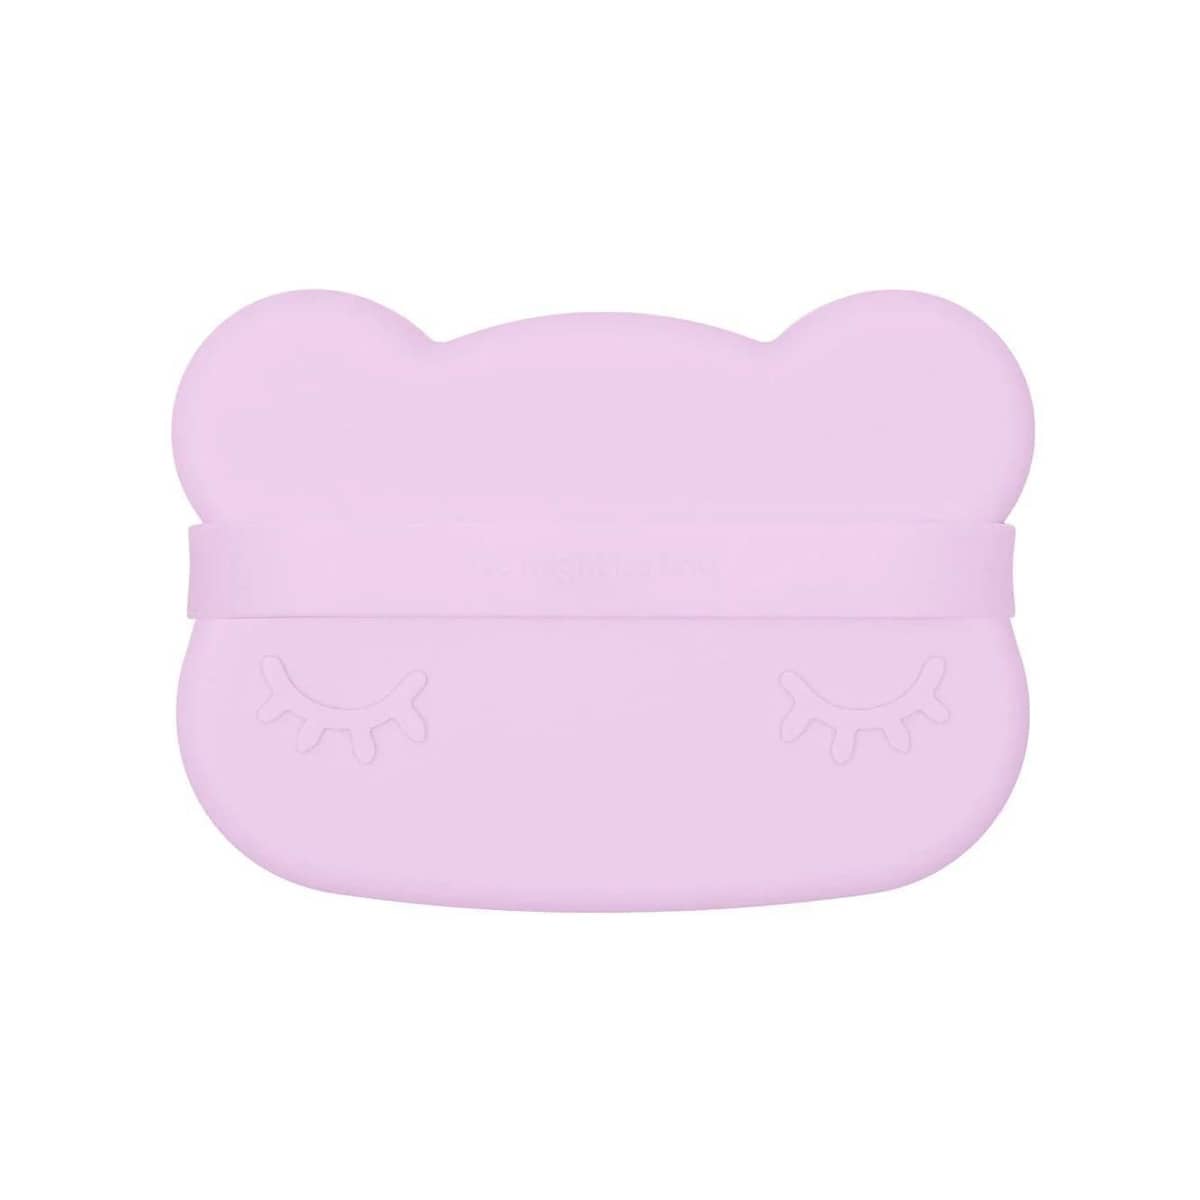 We Might Be Tiny Snackie Silicone Bowl + Plate - Bear - Lilac